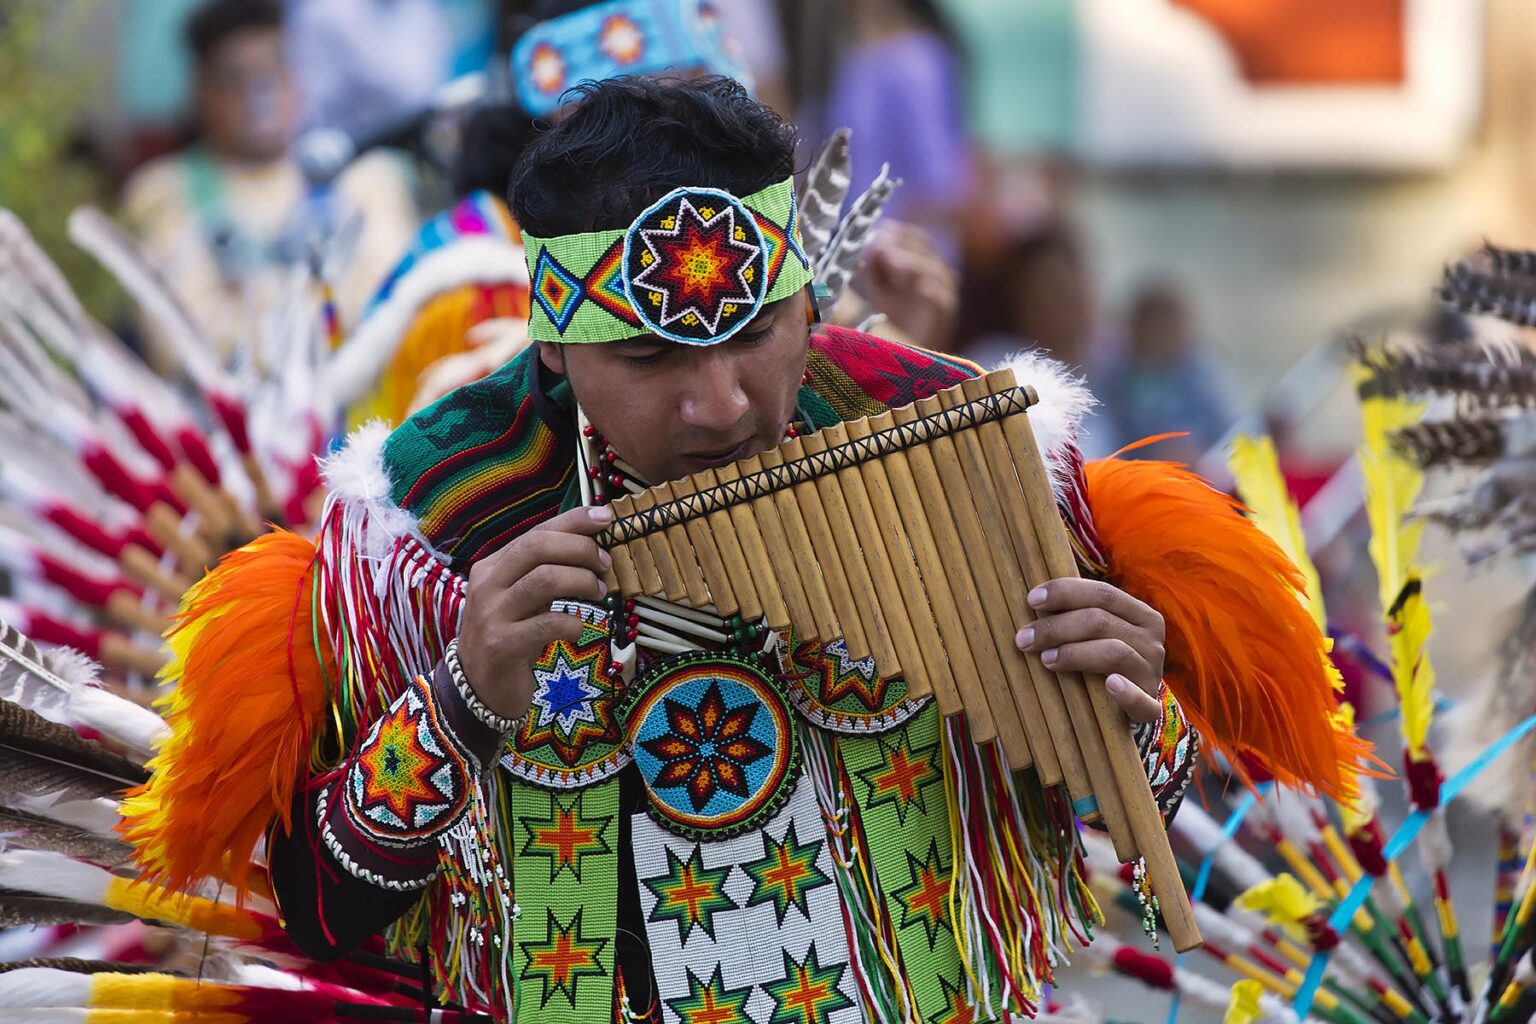 The Ecuadorian group INTI RUNAS plays pan flute and dances in traditional Indigenous attire - GUANAJUATO, MEXICO